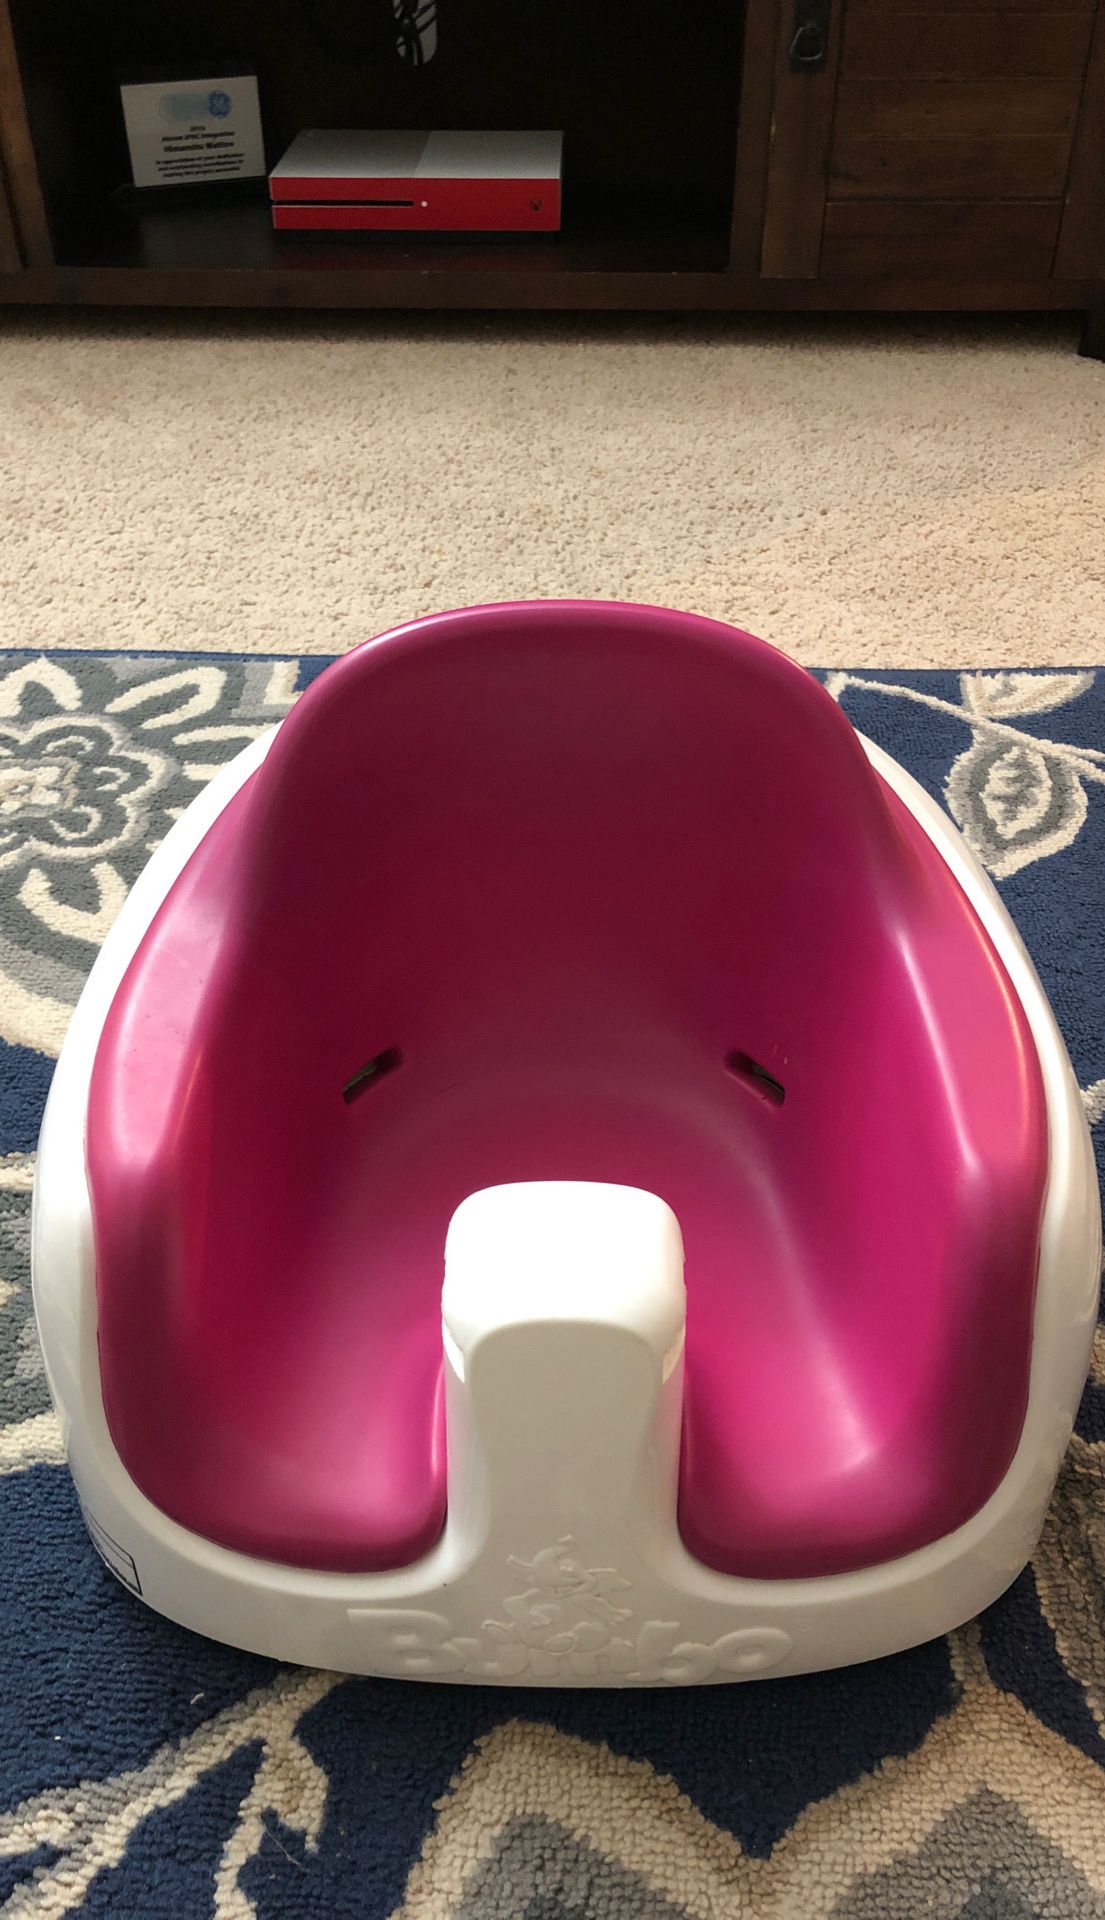 Bumbo Baby Seat - V Good condition